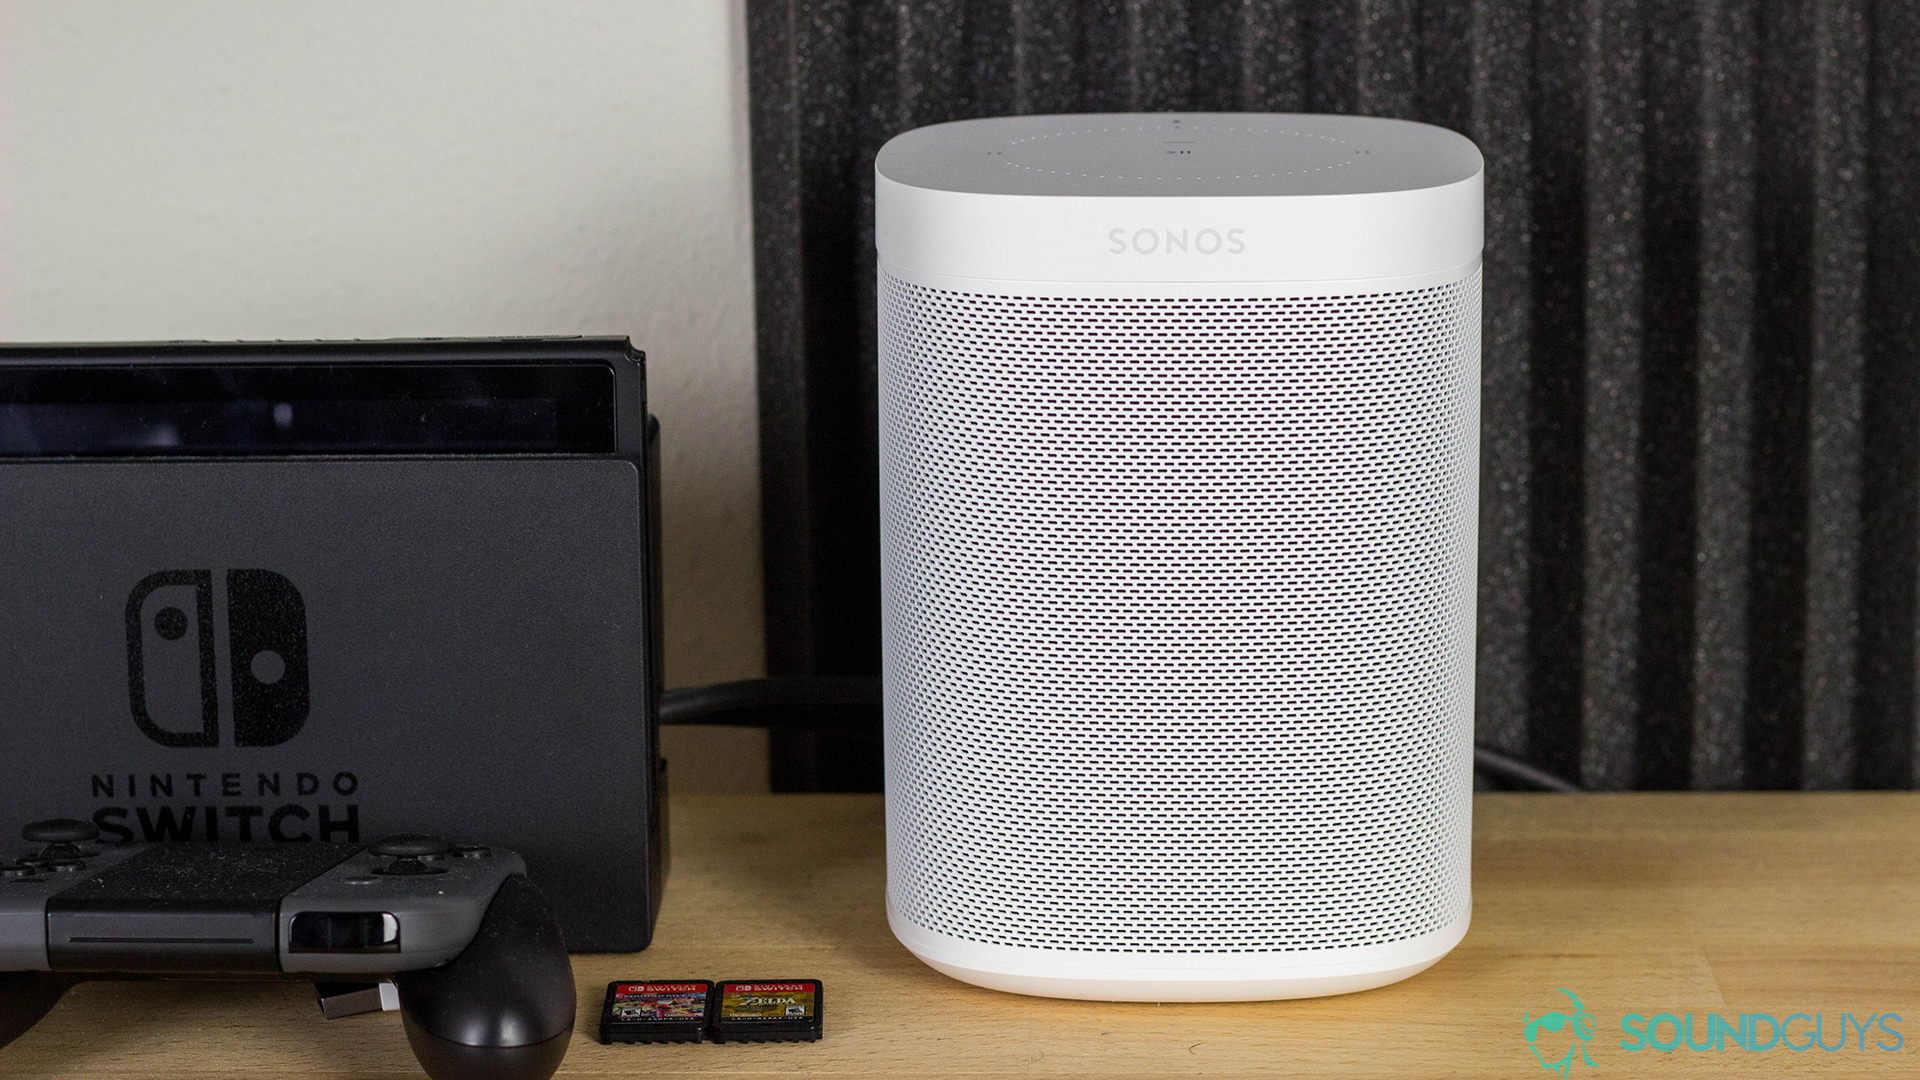 Sonos One in white next to a Nintendo Switch stand with game cartridges in front. The items are on a wood desk with soundproof foam in the background.